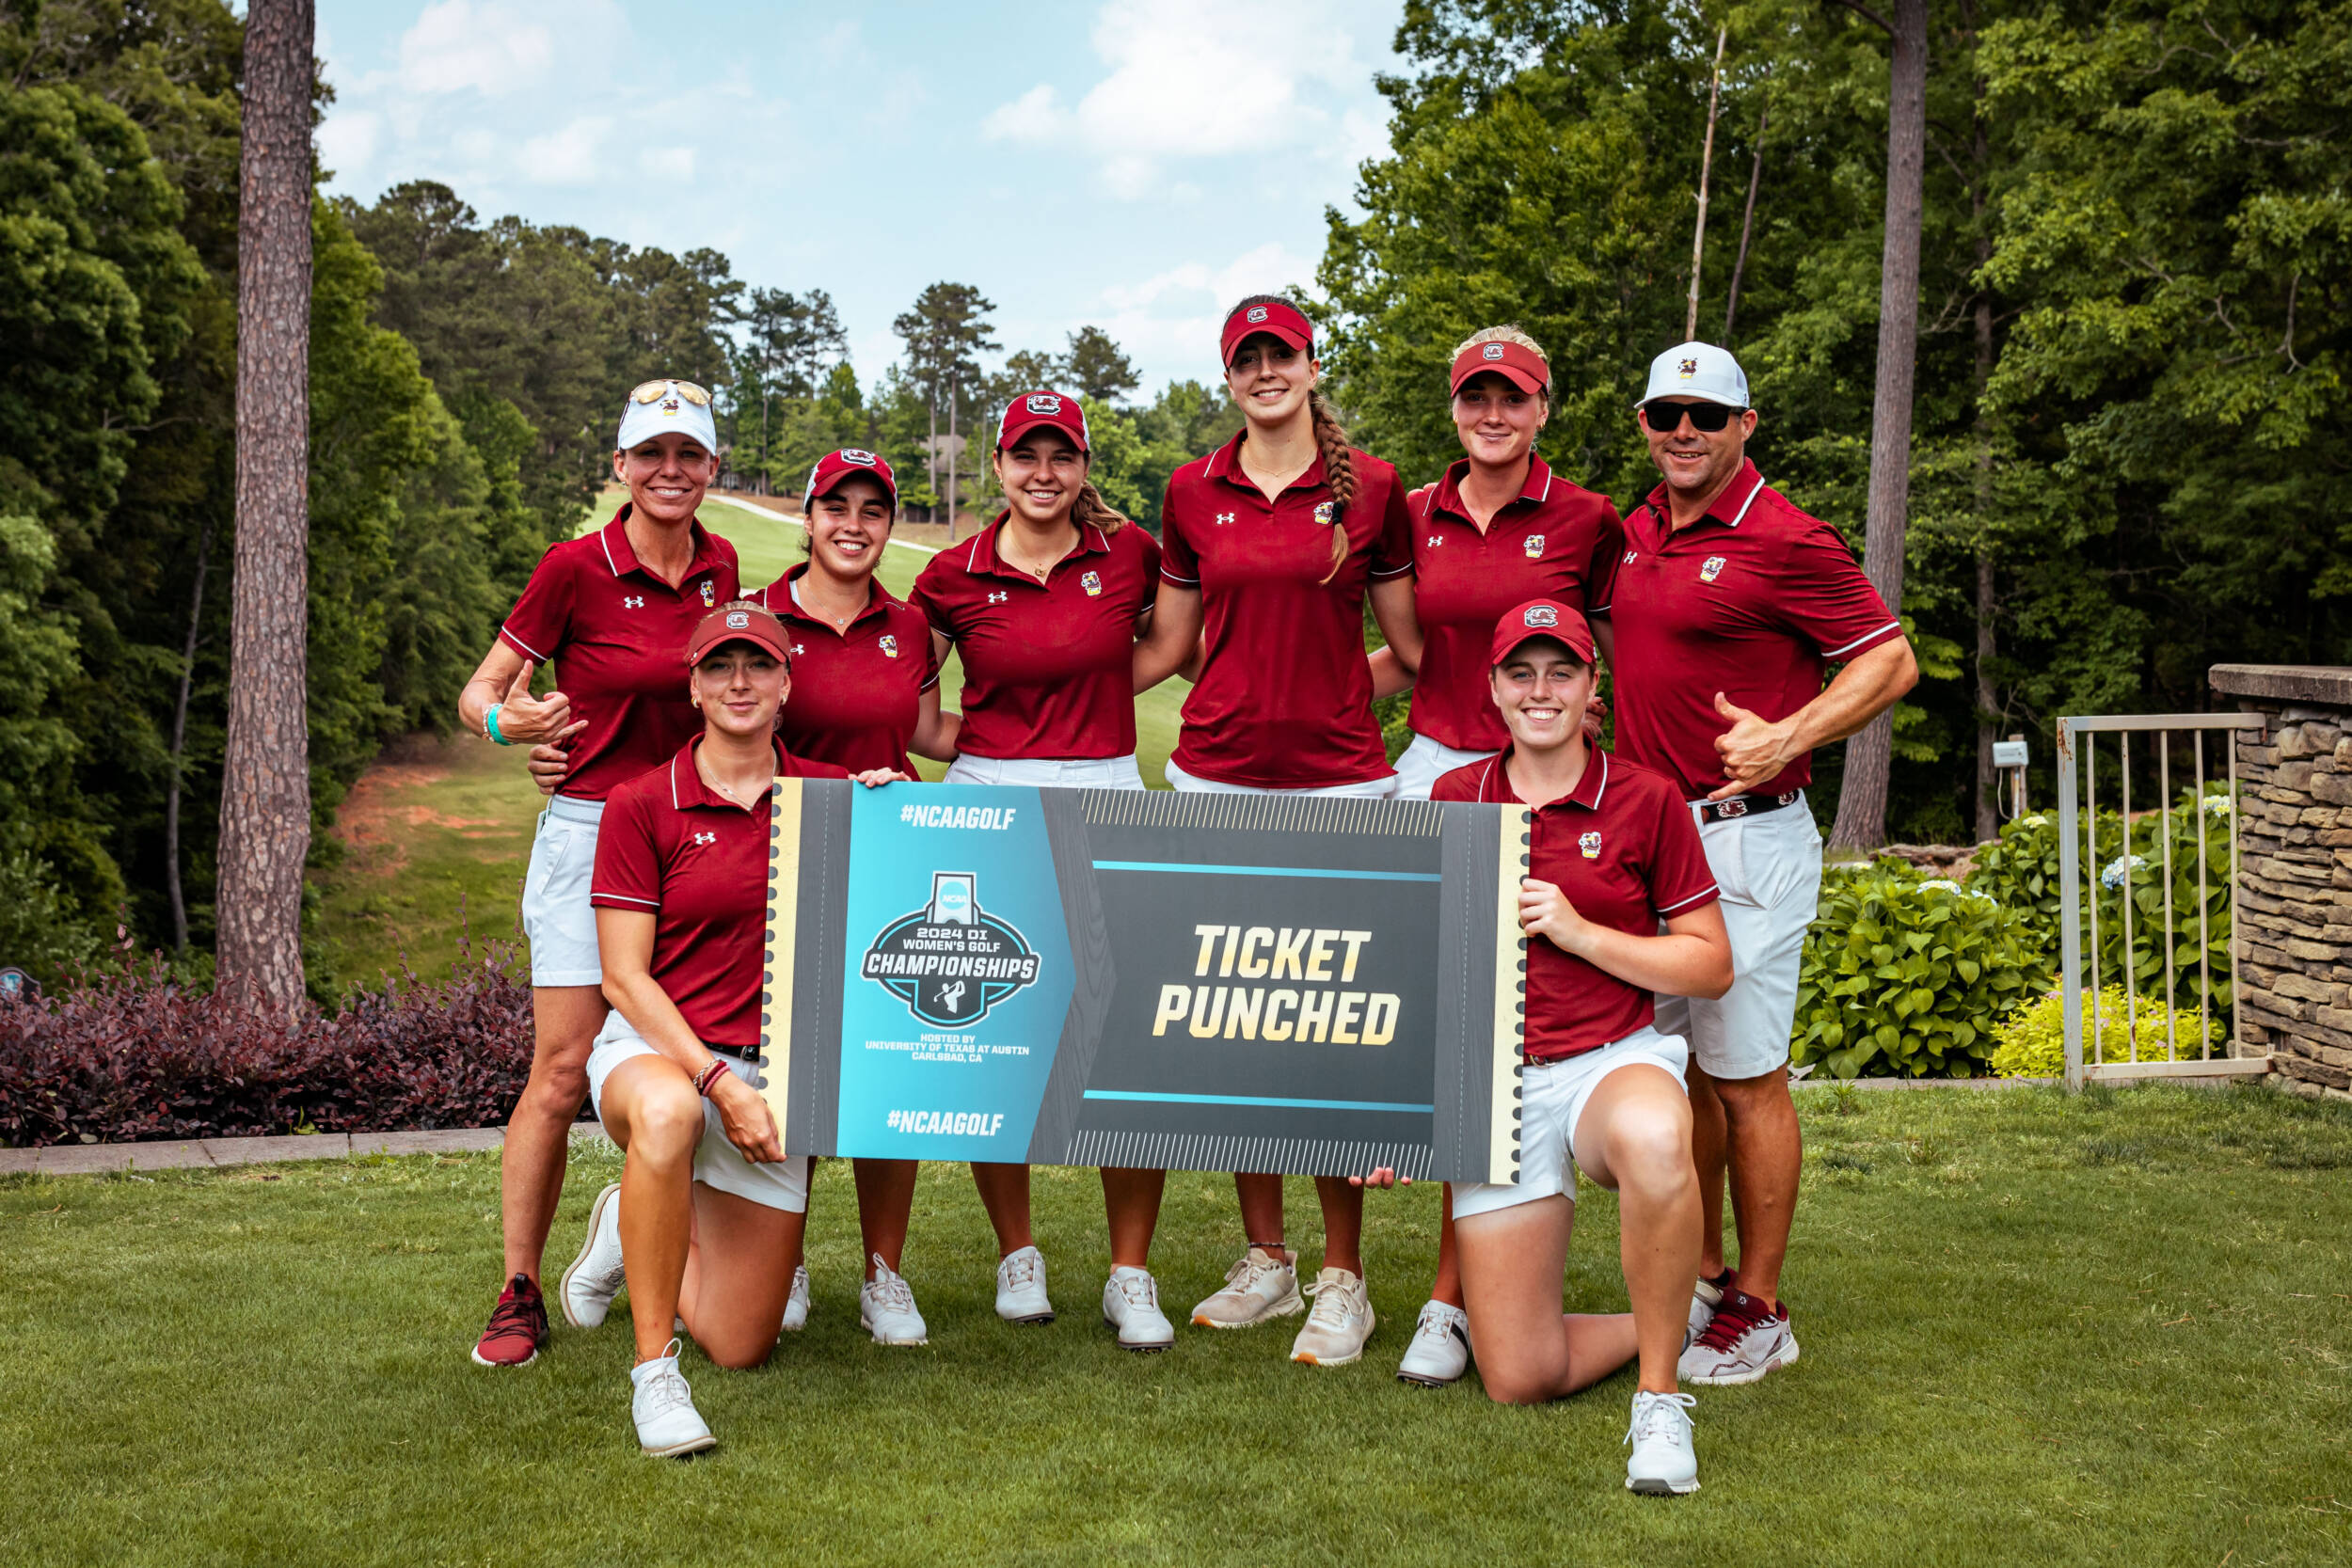 No. 2 Gamecocks Headed Back to Another NCAA Championship